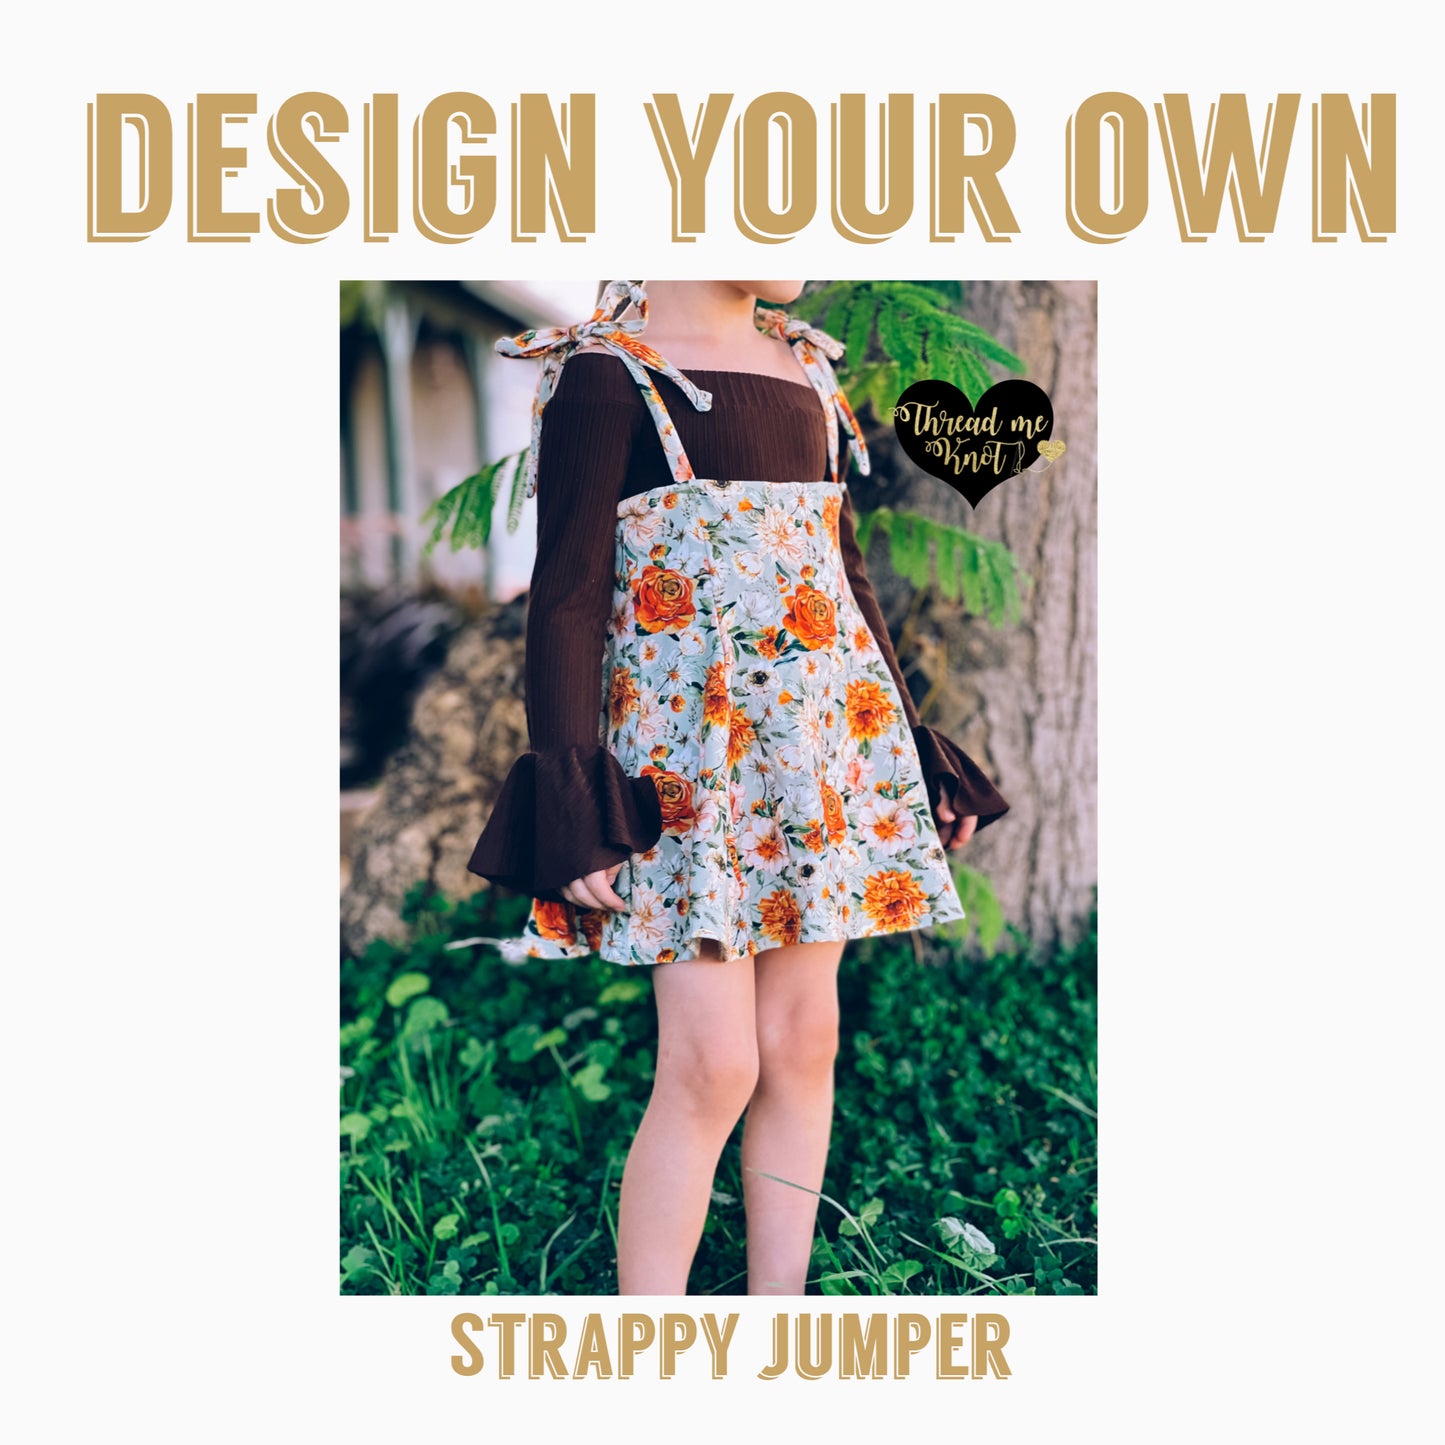 Design your own | Strappy Jumper